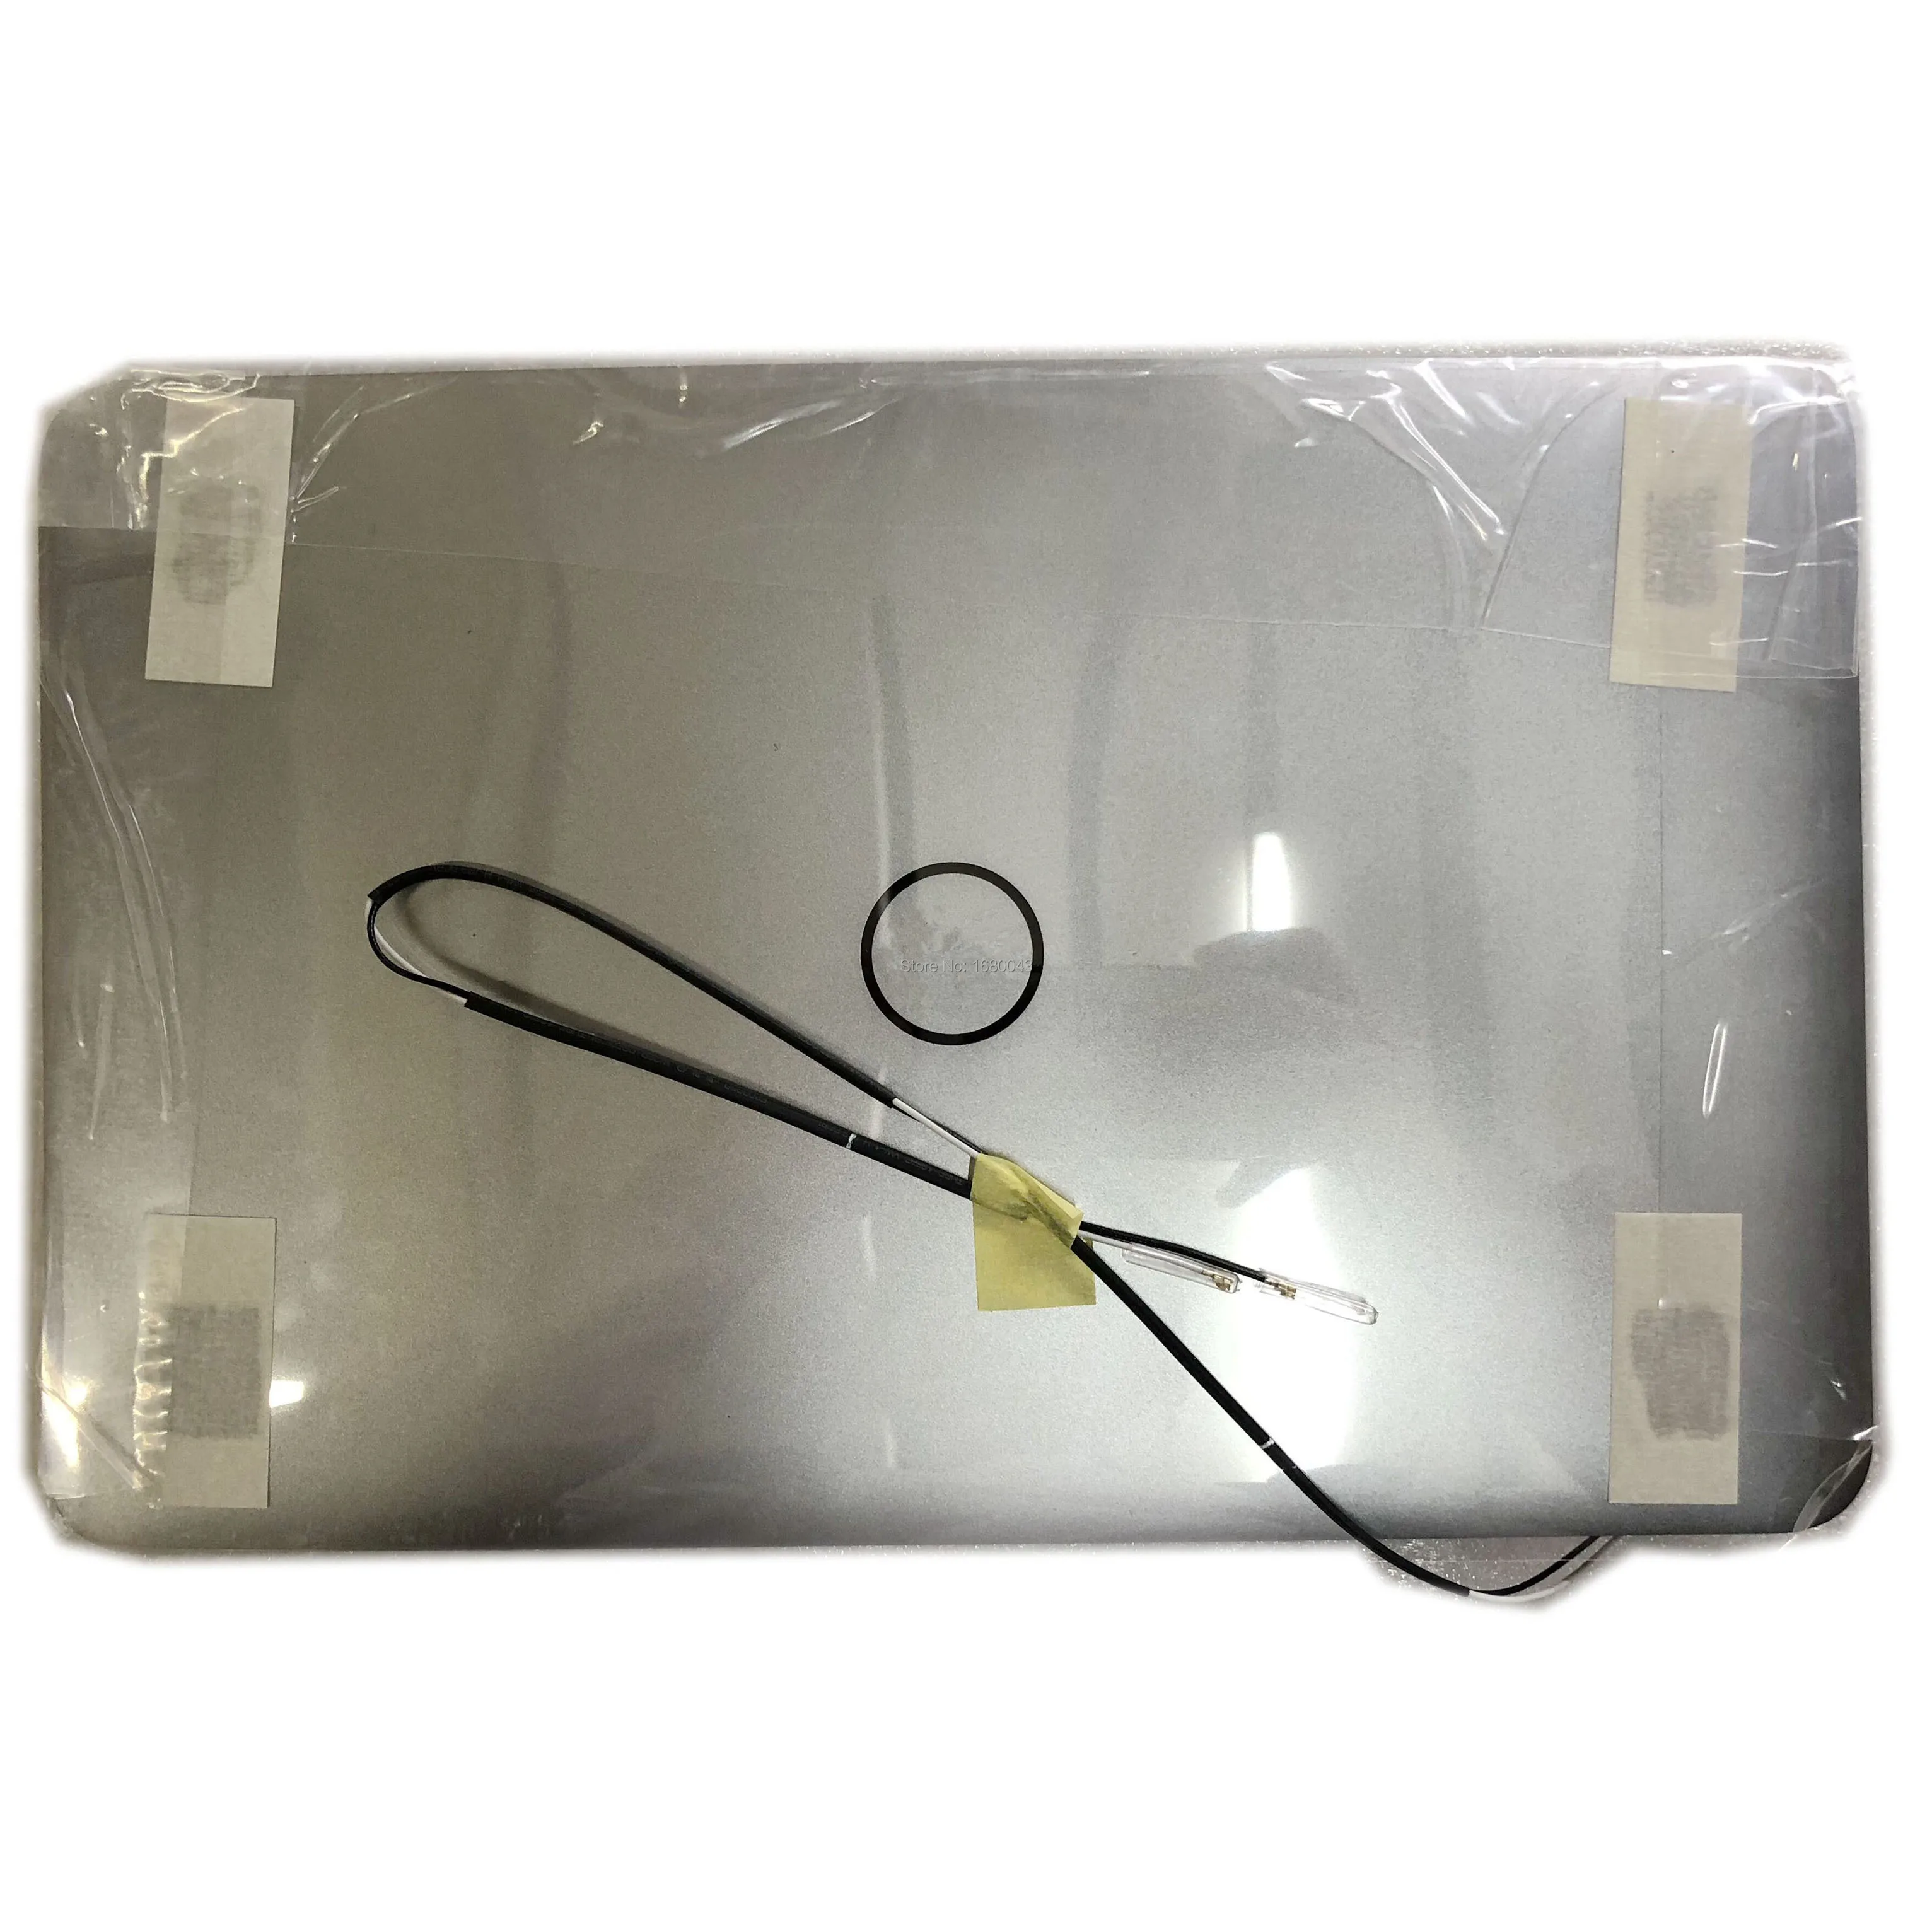 

For Dell XPS 13 L322 VKWJC 0VKWJC 1920x1080 13.3" FHD LCD Screen Full Assembly Replacement Parts Case Complete Upper Half Parts